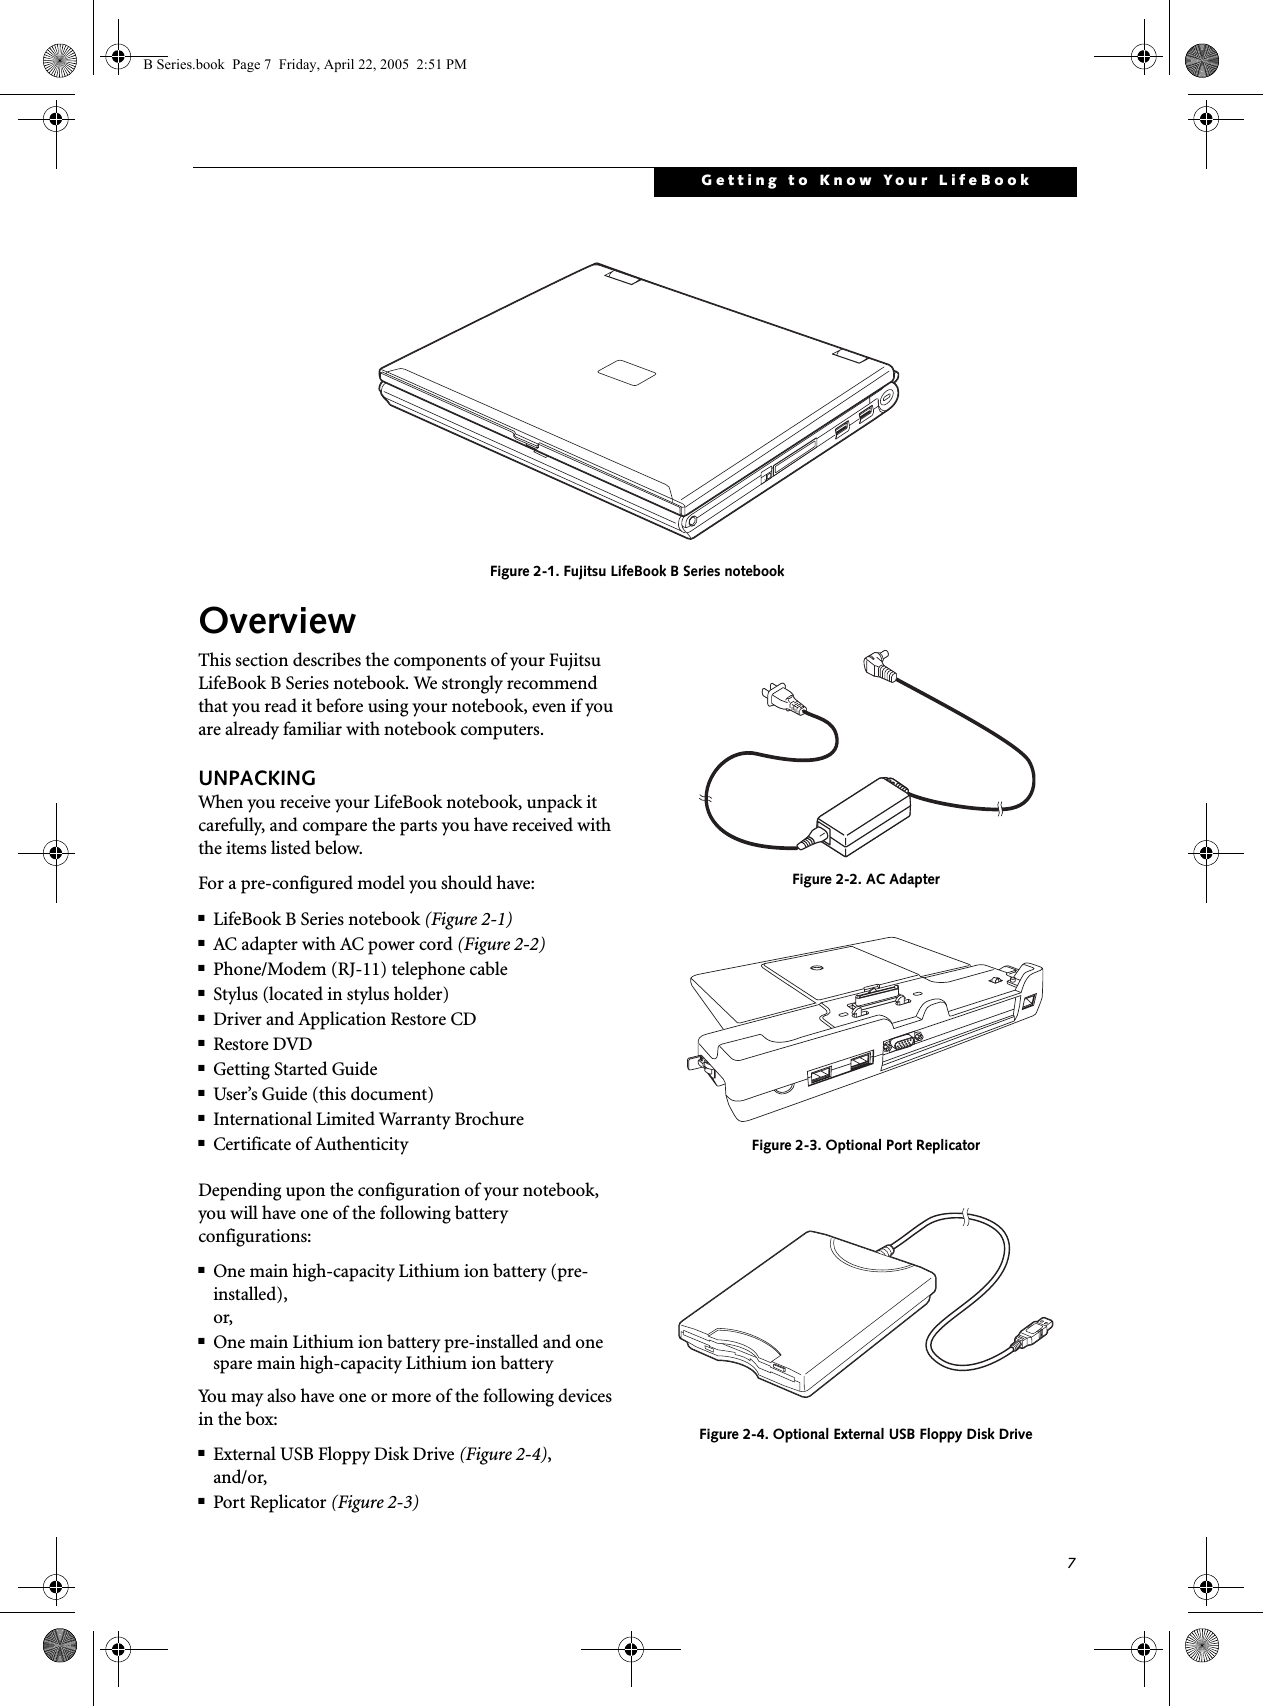 7Getting to Know Your LifeBook Figure 2-1. Fujitsu LifeBook B Series notebookOverviewThis section describes the components of your Fujitsu LifeBook B Series notebook. We strongly recommend that you read it before using your notebook, even if you are already familiar with notebook computers.UNPACKINGWhen you receive your LifeBook notebook, unpack it carefully, and compare the parts you have received with the items listed below.For a pre-configured model you should have:■LifeBook B Series notebook (Figure 2-1)■AC adapter with AC power cord (Figure 2-2)■Phone/Modem (RJ-11) telephone cable■Stylus (located in stylus holder)■Driver and Application Restore CD■Restore DVD■Getting Started Guide■User’s Guide (this document)■International Limited Warranty Brochure■Certificate of AuthenticityDepending upon the configuration of your notebook, you will have one of the following battery configurations: ■One main high-capacity Lithium ion battery (pre-installed), or,■One main Lithium ion battery pre-installed and one spare main high-capacity Lithium ion batteryYou may also have one or more of the following devices in the box:■External USB Floppy Disk Drive (Figure 2-4),and/or,■Port Replicator (Figure 2-3) Figure 2-2. AC AdapterFigure 2-3. Optional Port ReplicatorFigure 2-4. Optional External USB Floppy Disk DriveB Series.book  Page 7  Friday, April 22, 2005  2:51 PM